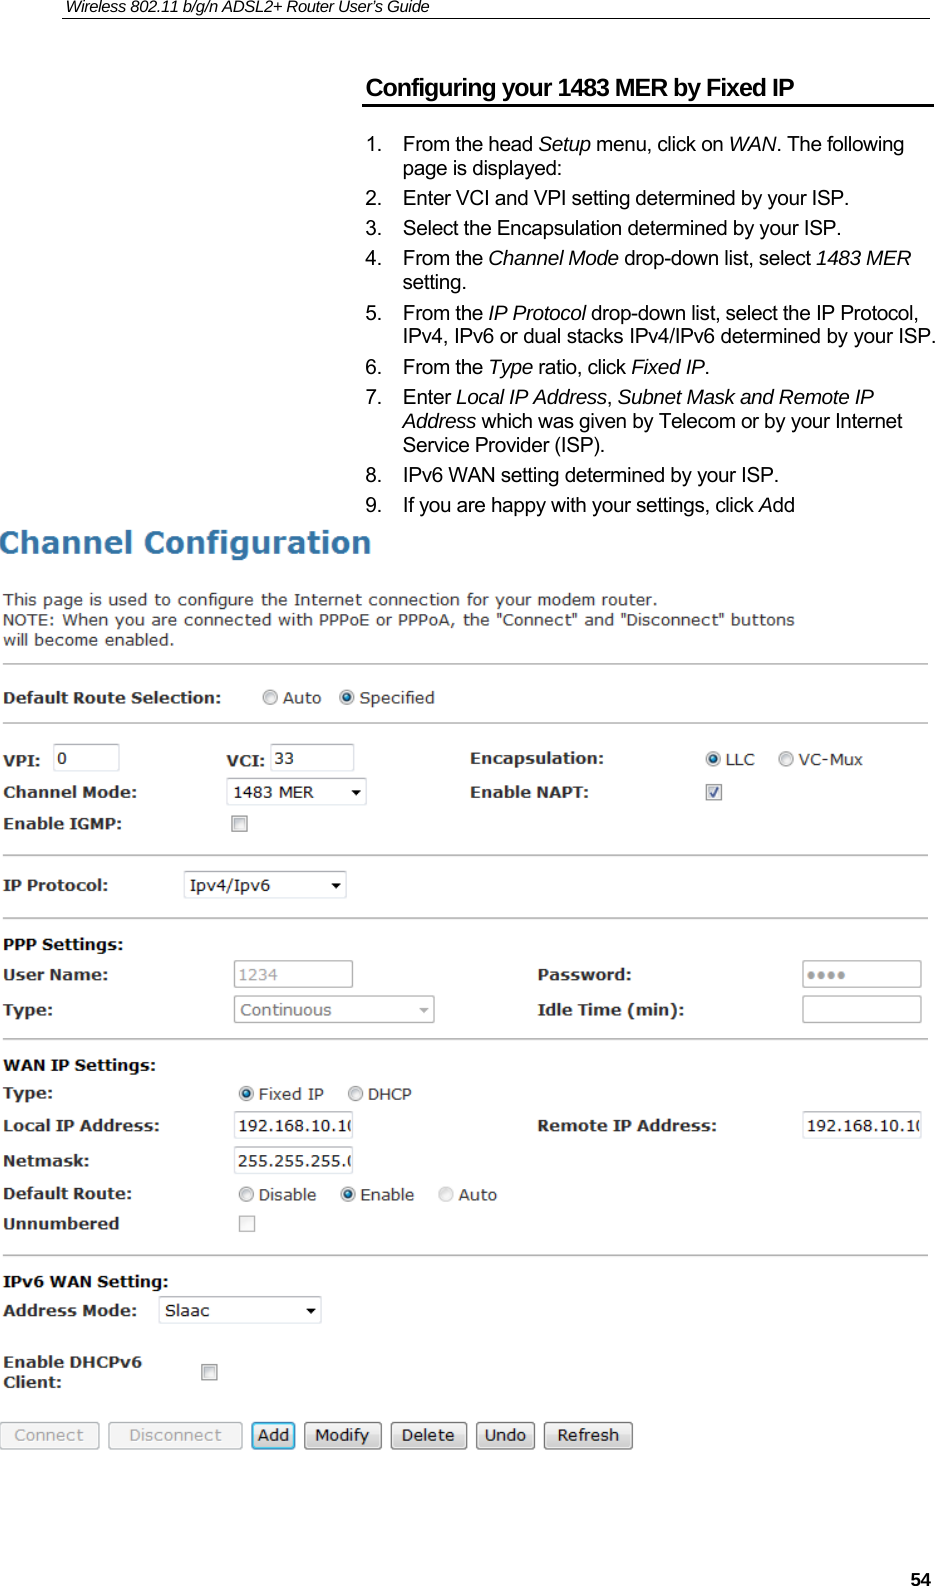 Wireless 802.11 b/g/n ADSL2+ Router User’s Guide    Configuring your 1483 MER by Fixed IP 1. From the head Setup menu, click on WAN. The following page is displayed: 2.  Enter VCI and VPI setting determined by your ISP. 3.  Select the Encapsulation determined by your ISP. 4. From the Channel Mode drop-down list, select 1483 MER setting. 5. From the IP Protocol drop-down list, select the IP Protocol, IPv4, IPv6 or dual stacks IPv4/IPv6 determined by your ISP. 6. From the Type ratio, click Fixed IP. 7. Enter Local IP Address, Subnet Mask and Remote IP Address which was given by Telecom or by your Internet Service Provider (ISP). 8.  IPv6 WAN setting determined by your ISP. 9.  If you are happy with your settings, click Add    54